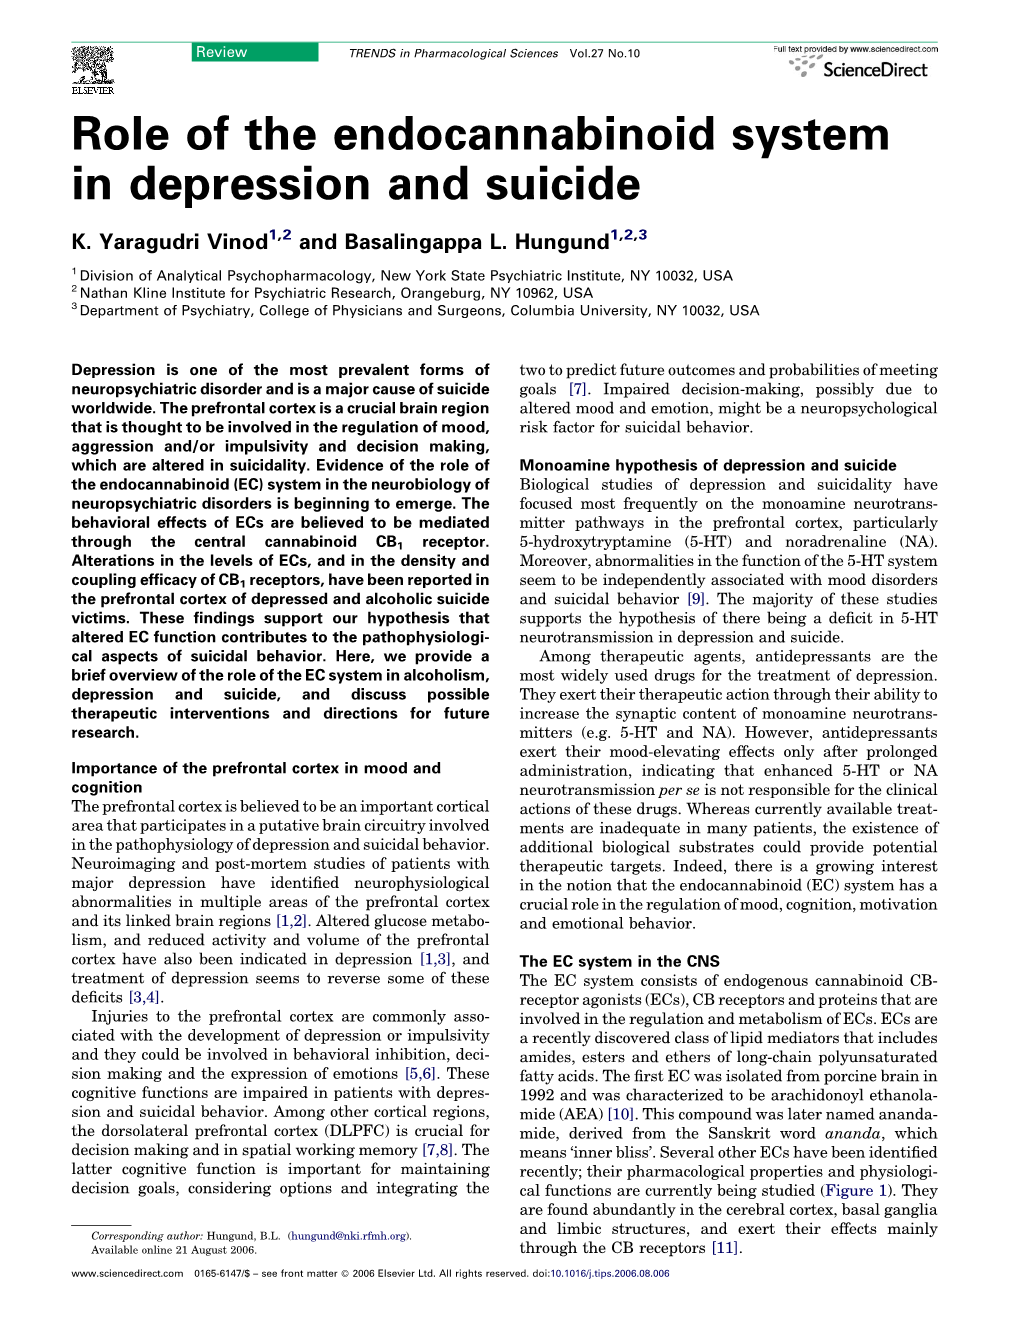 Role of the Endocannabinoid System in Depression and Suicide